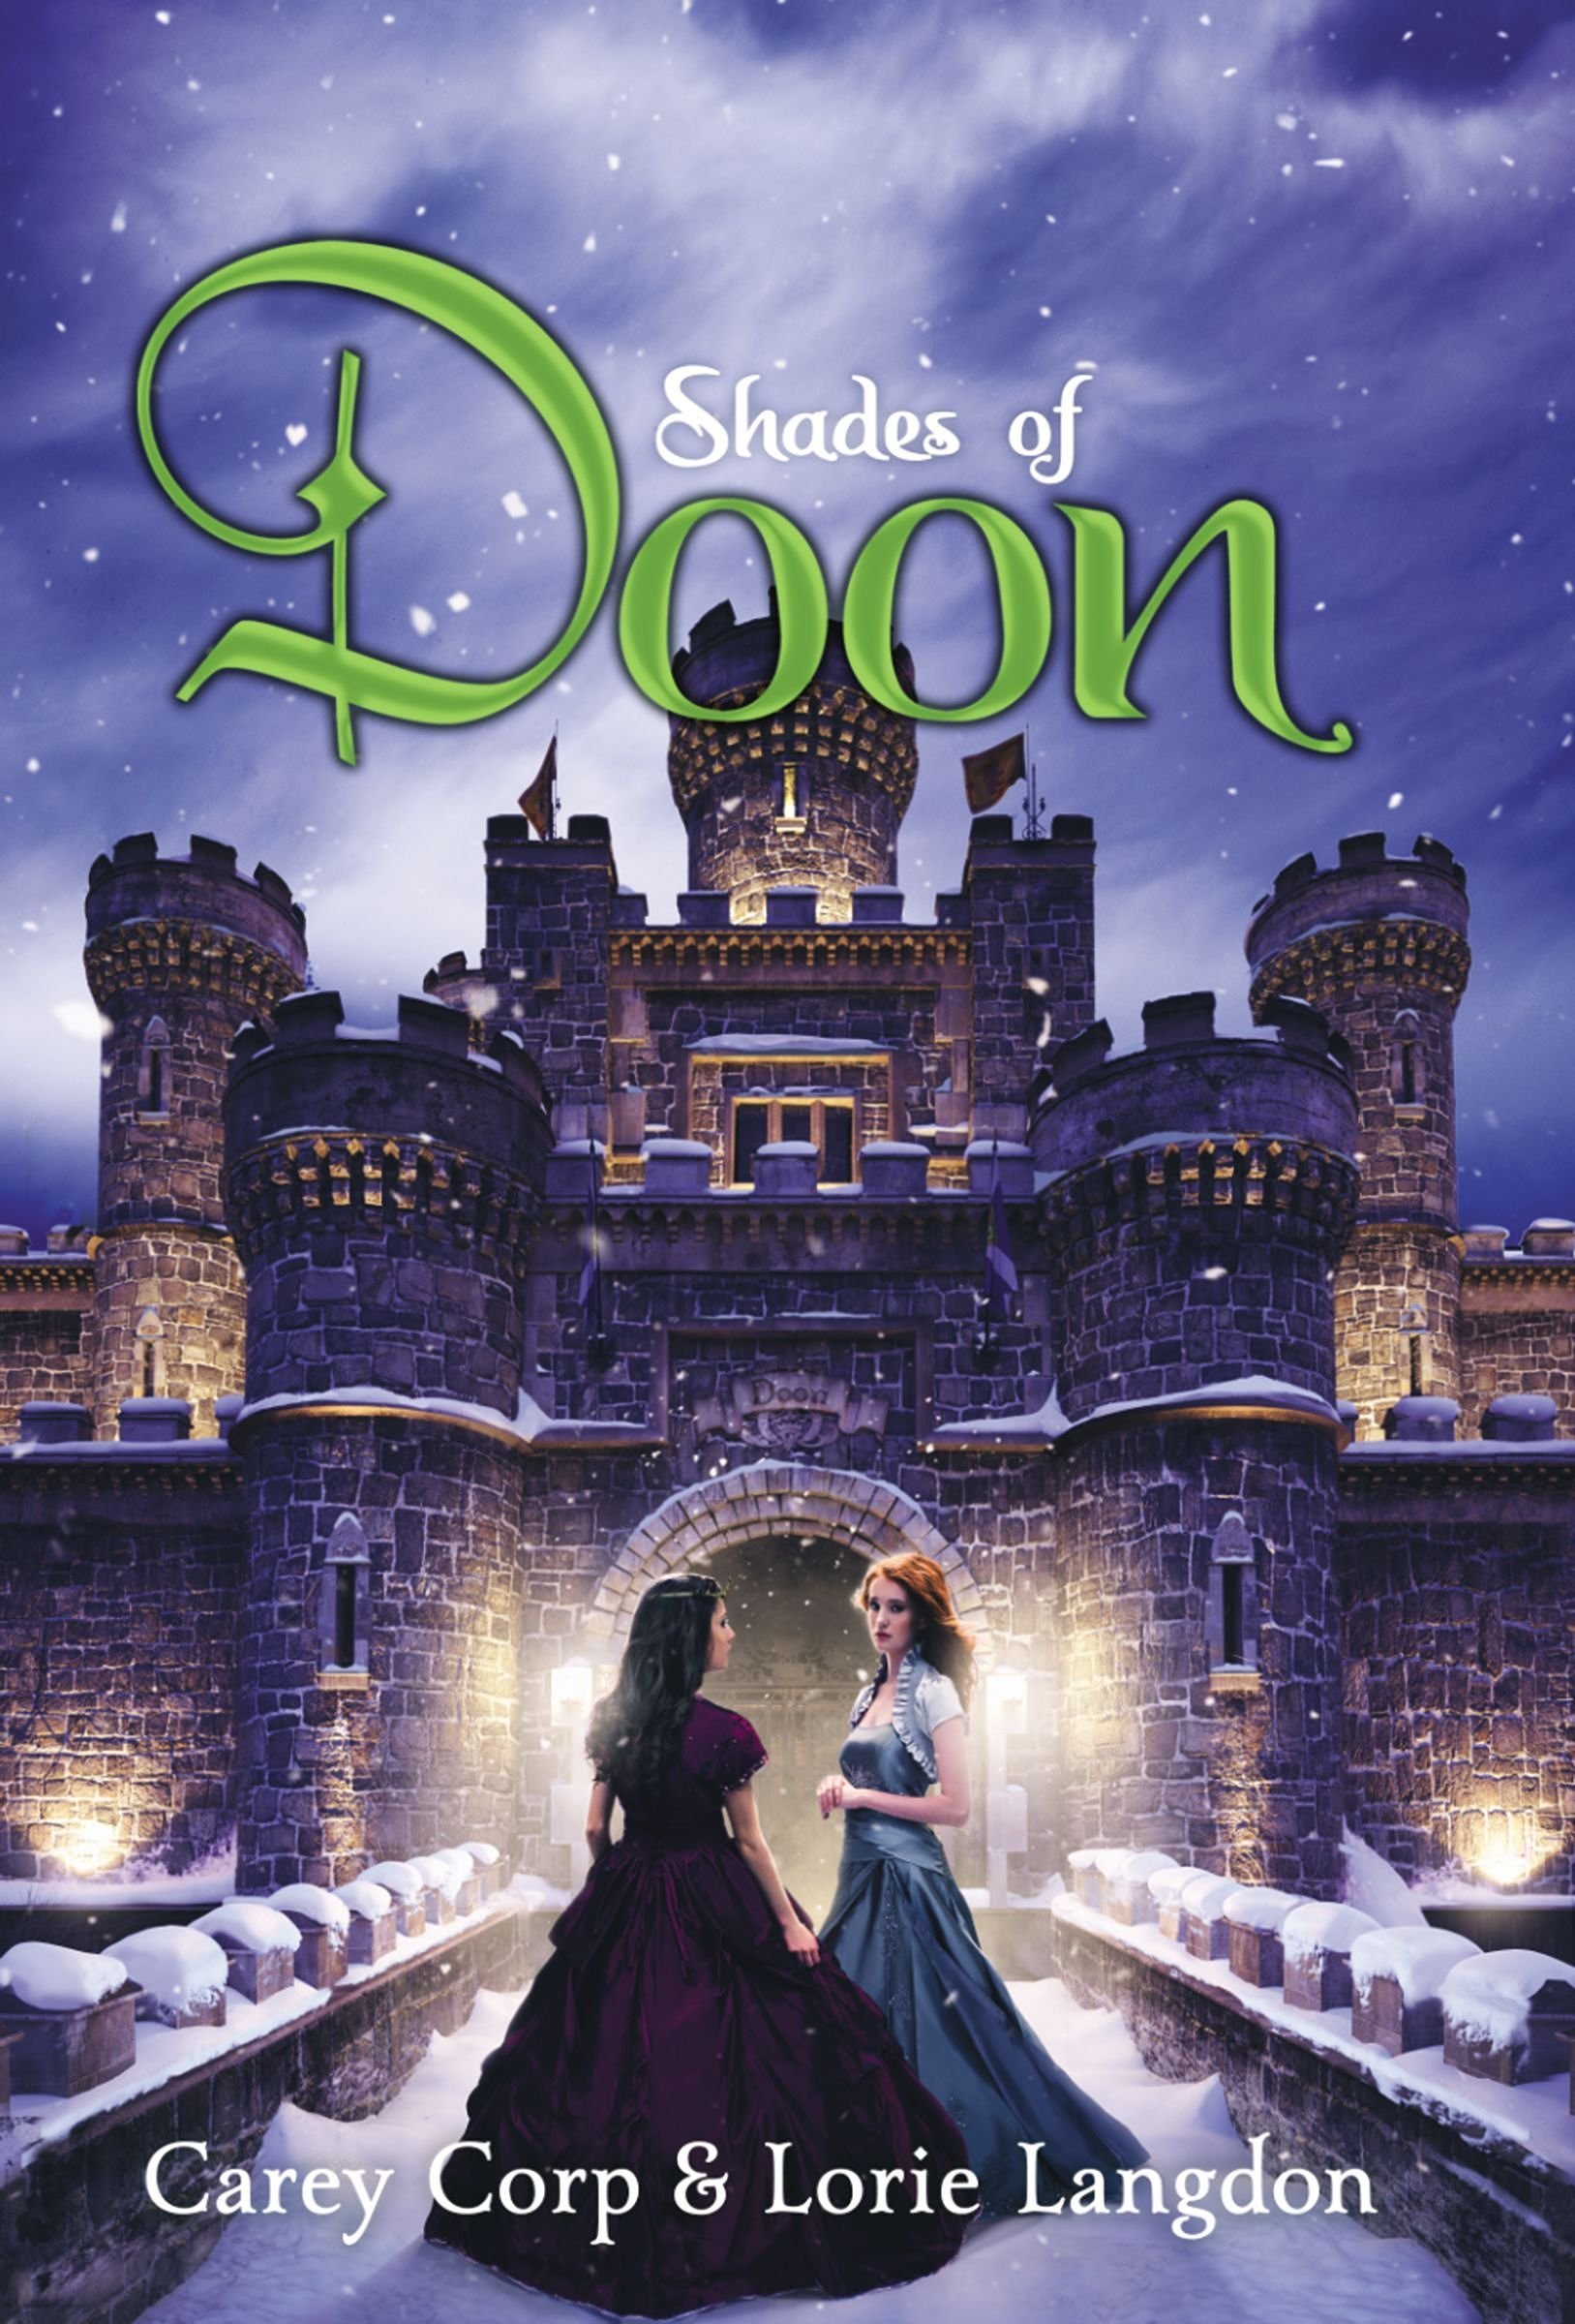 book review: Shades of Doon by Carey Corp & Lorie Langdon on willbakeforbooks.com